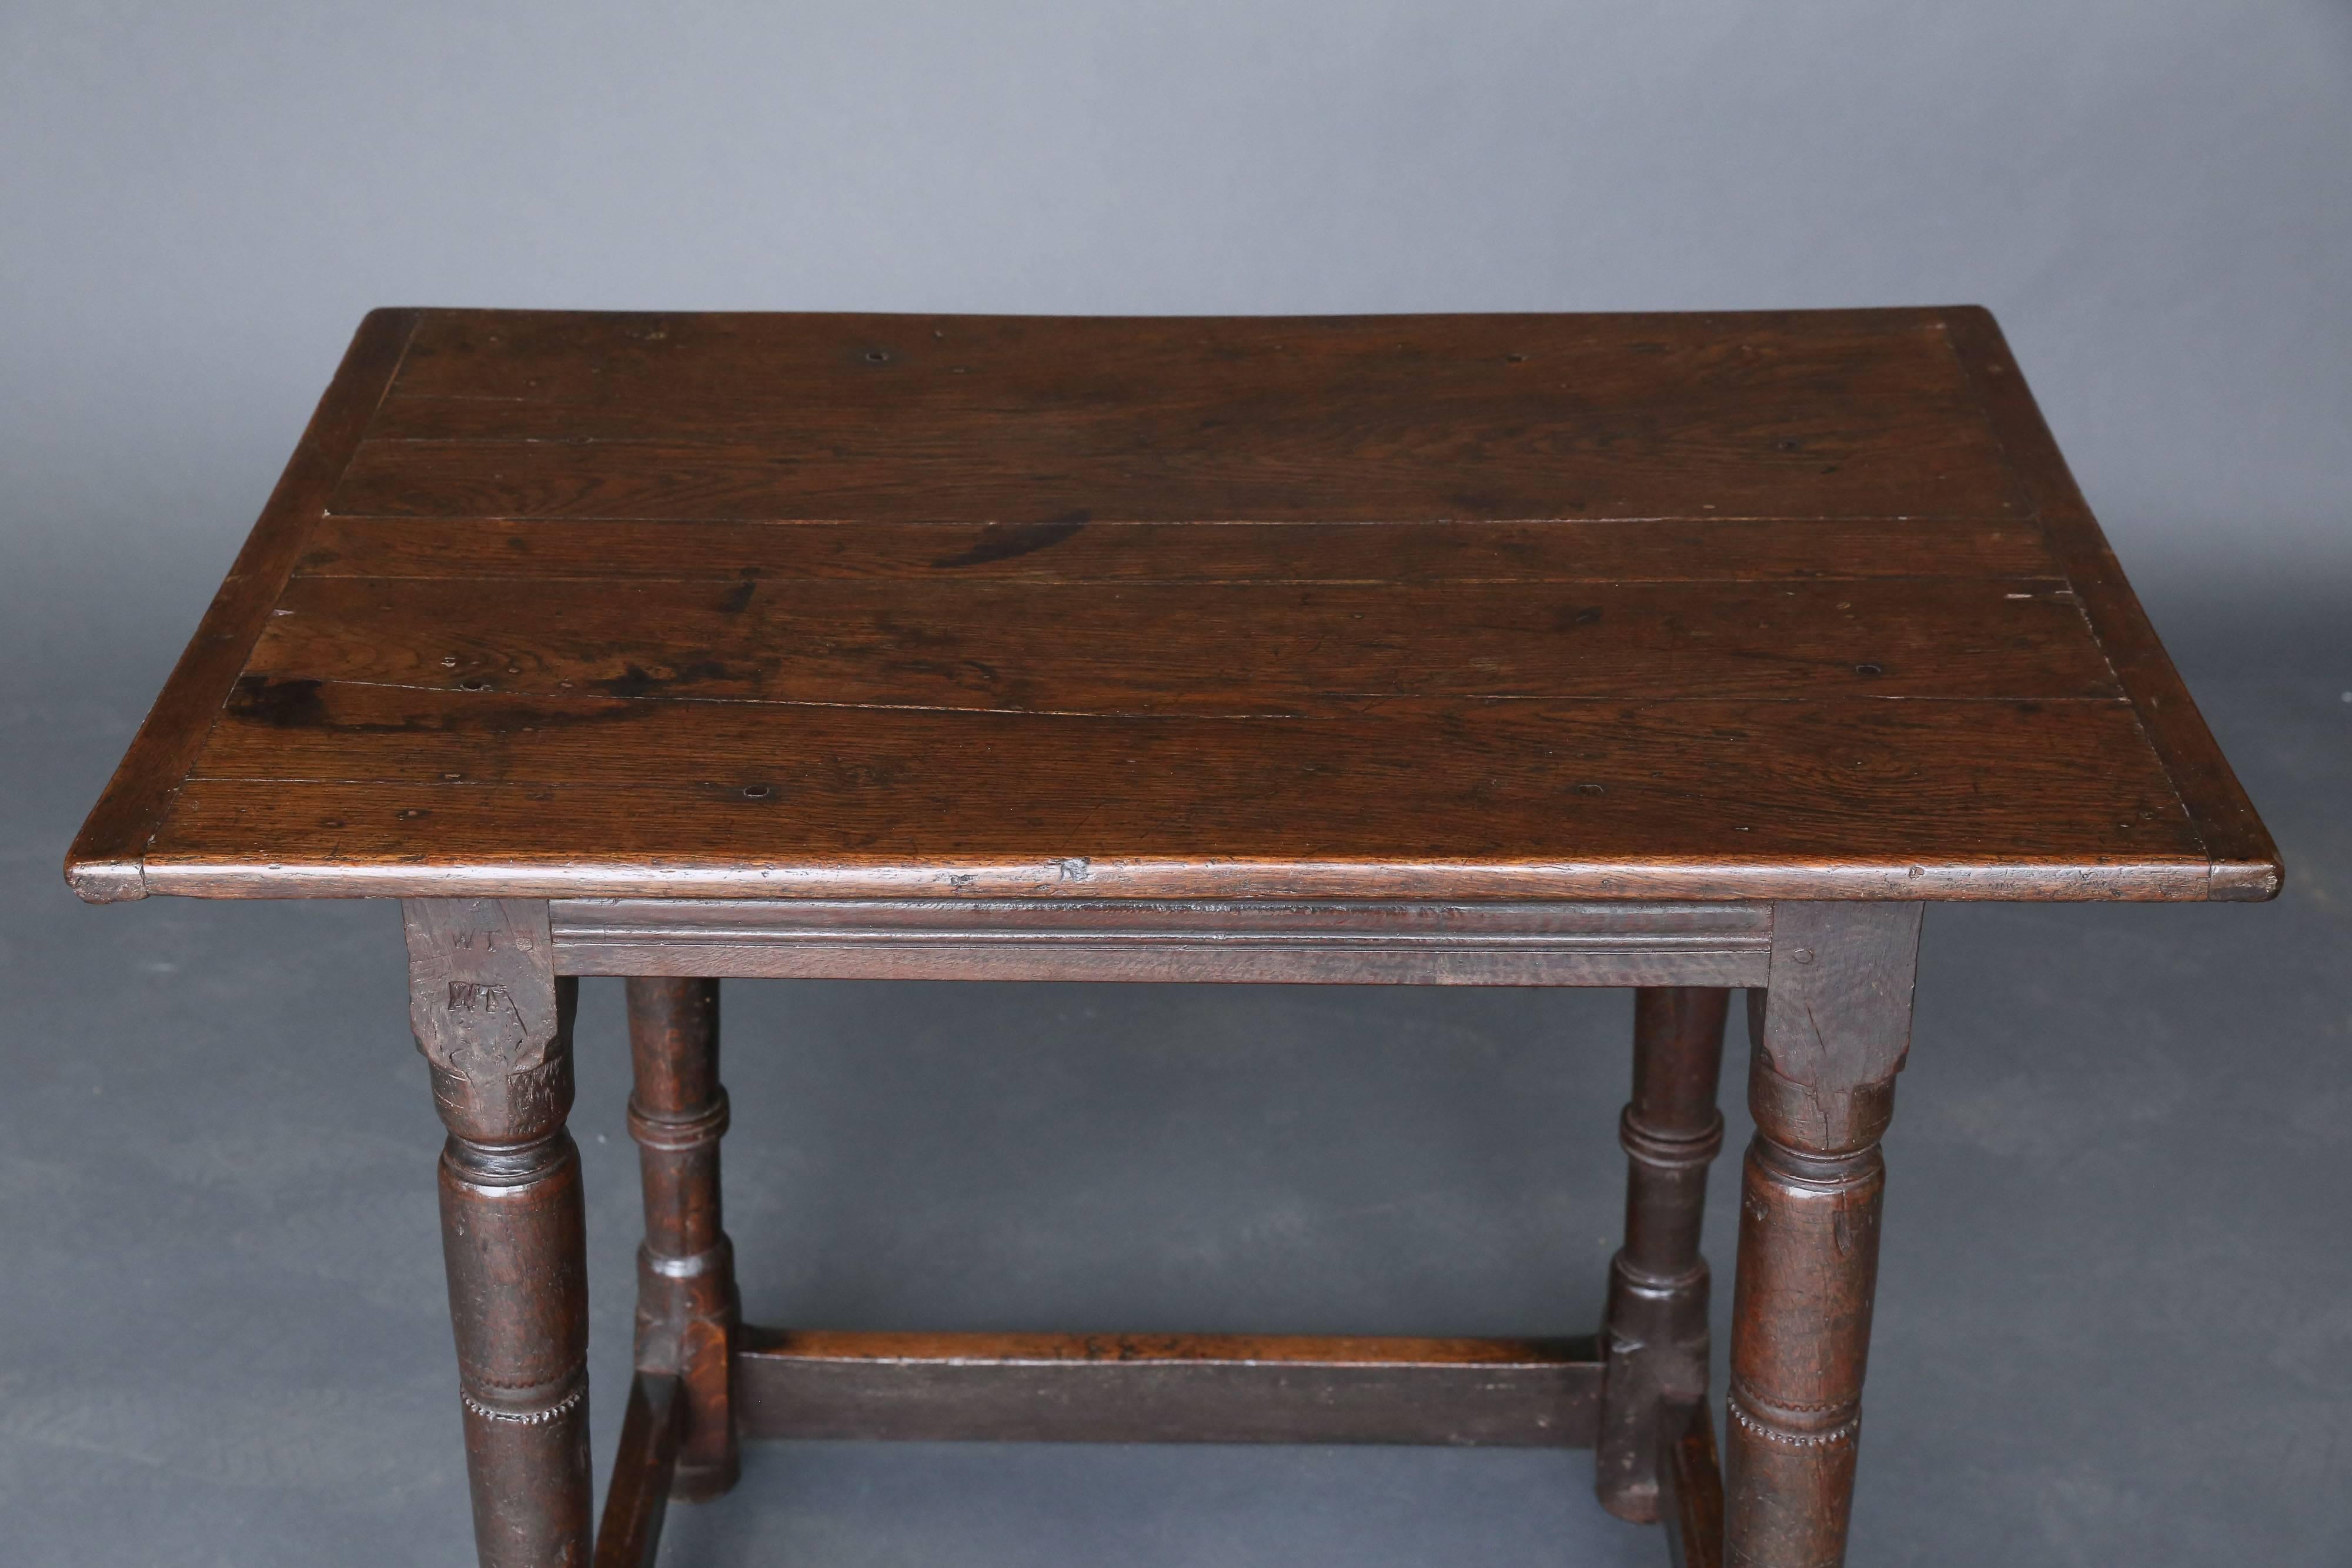 Charles II style oak side table with four turned legs and a rectangular support/stretchers around the base of the four legs.